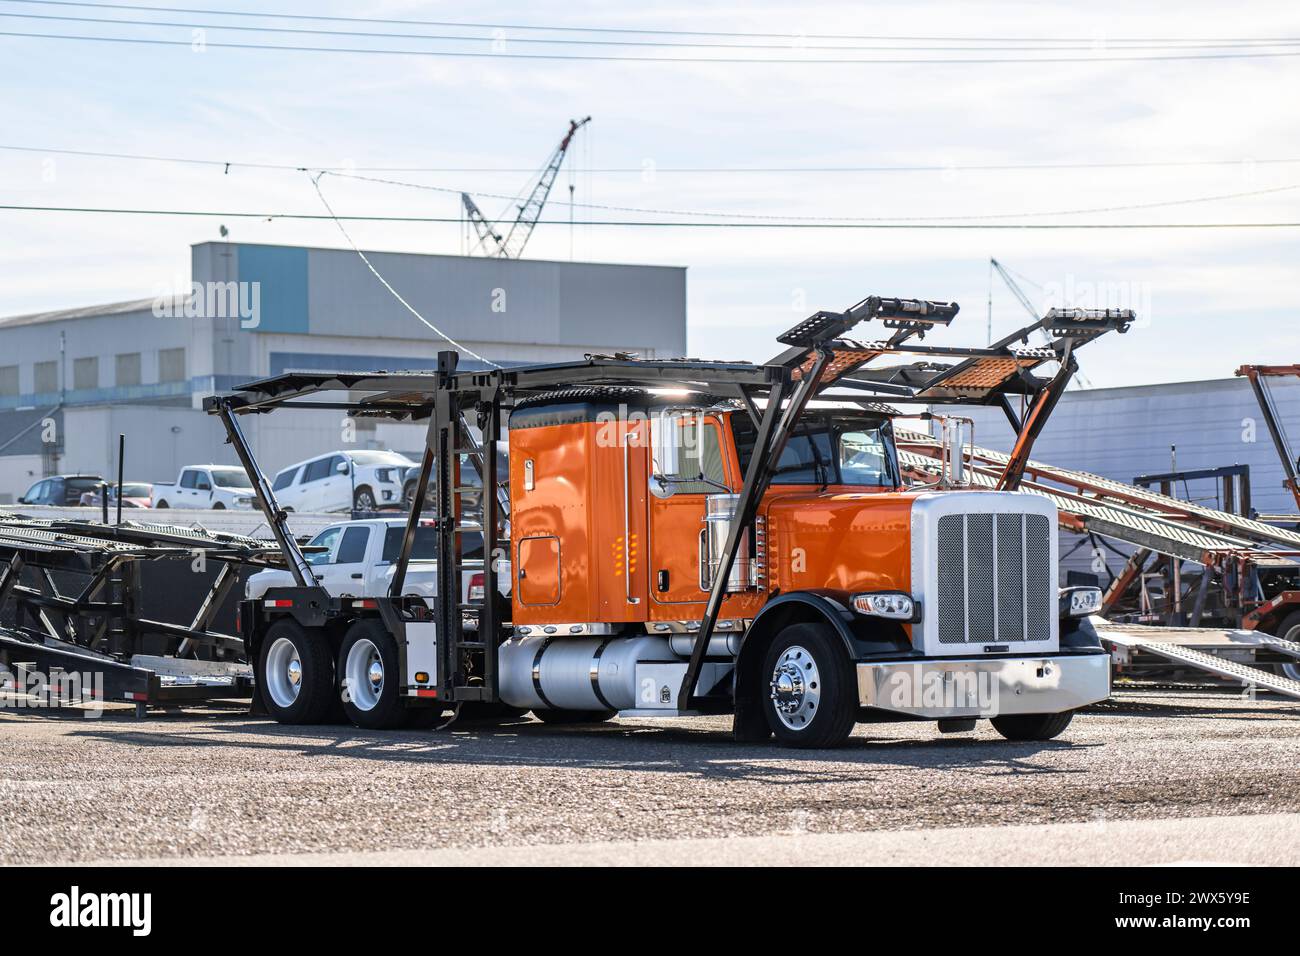 Industrial carrier orange car hauler big rig semi truck tractor with empty two level hydraulic semi trailer standing on the warehouse parking lot wain Stock Photo